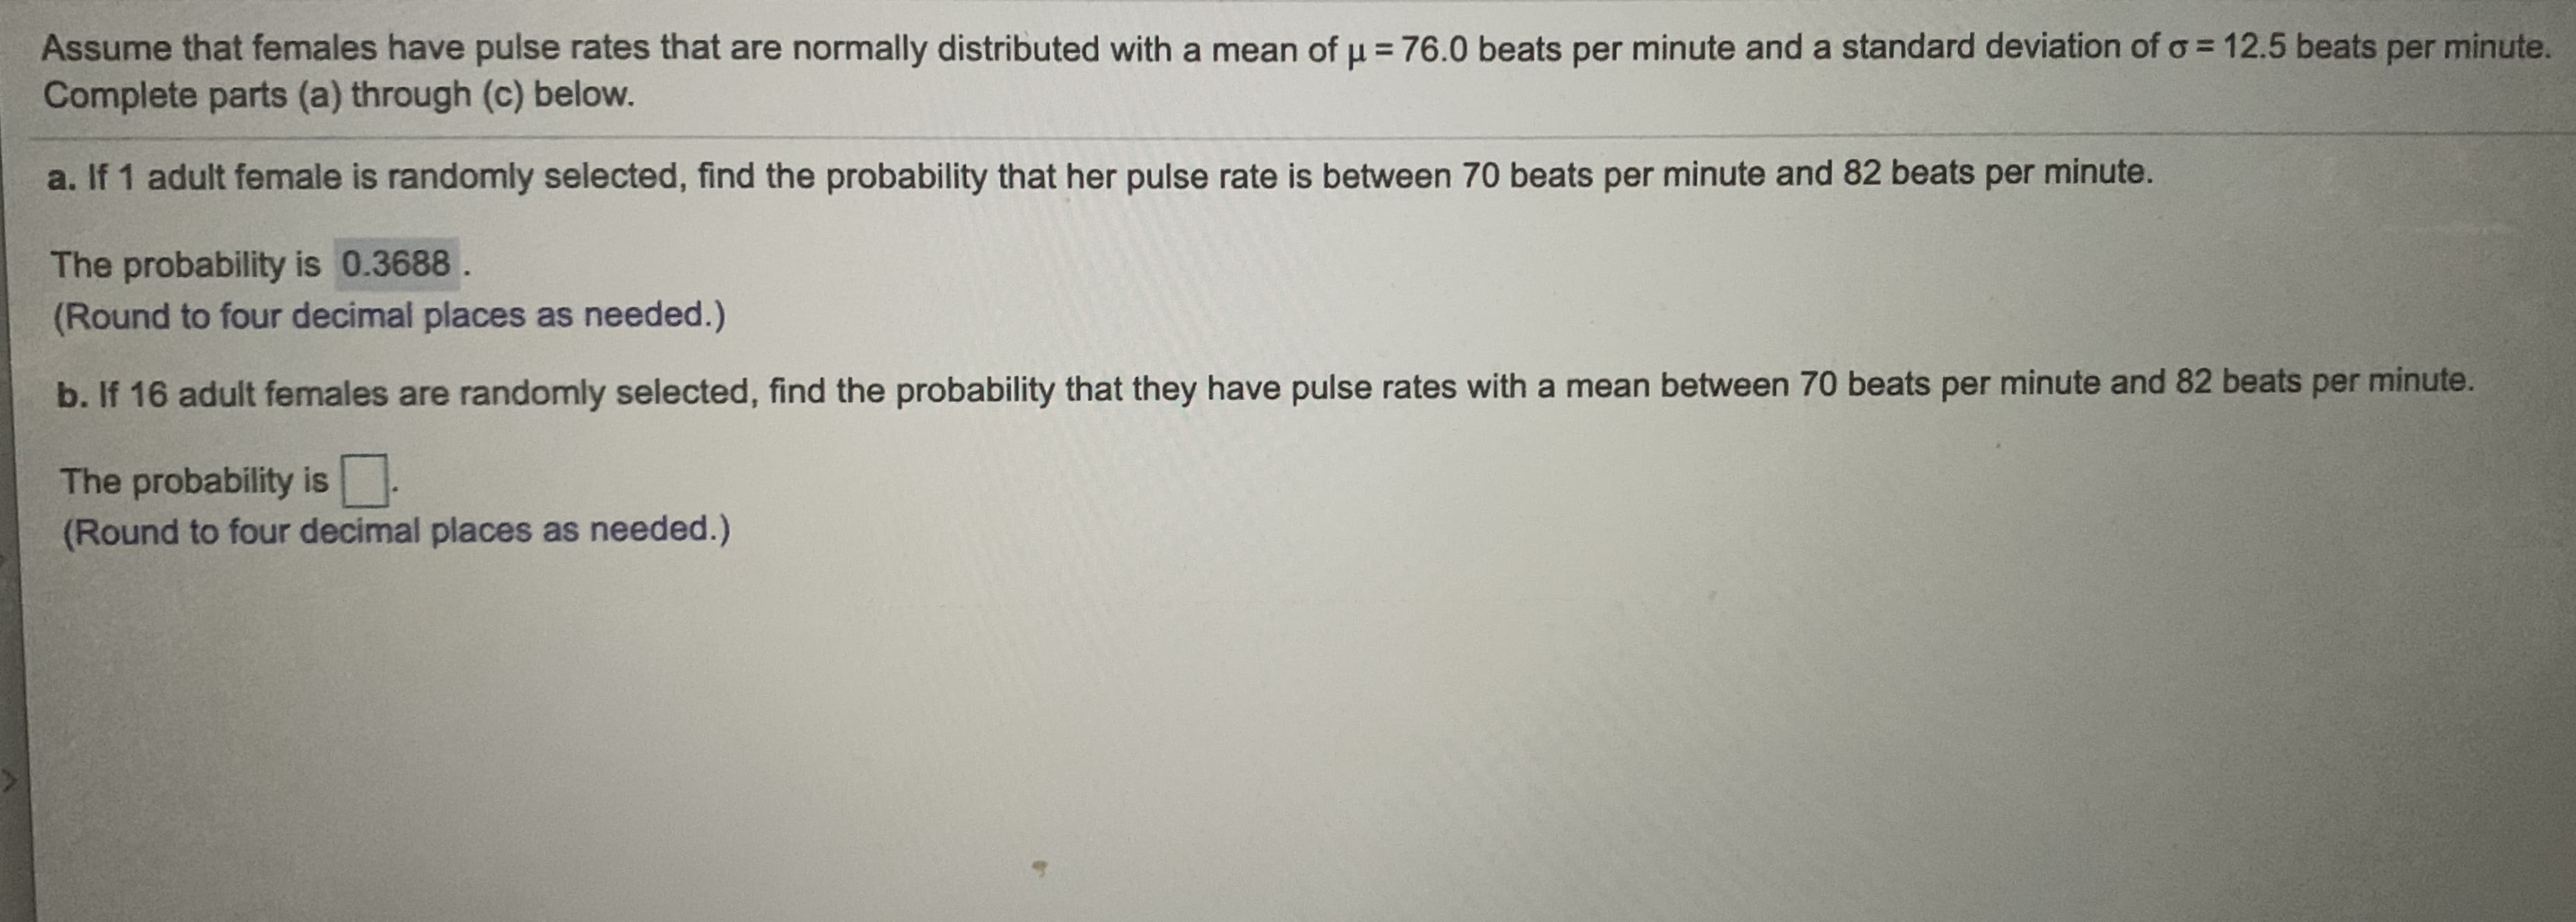 Assume that females have pulse rates that are normally distributed with a mean of u = 76.0 beats per minute and a standard deviation of o = 12.5 beats per minute.
Complete parts (a) through (c) below.
a. If 1 adult female is randomly selected, find the probability that her pulse rate is between 70 beats per minute and 82 beats per minute.
The probability is 0.3688.
(Round to four decimal places as needed.)
b. If 16 adult females are randomly selected, find the probability that they have pulse rates with a mean between 70 beats per minute and 82 beats per minute.
The probability is .
(Round to four decimal places as needed.)
